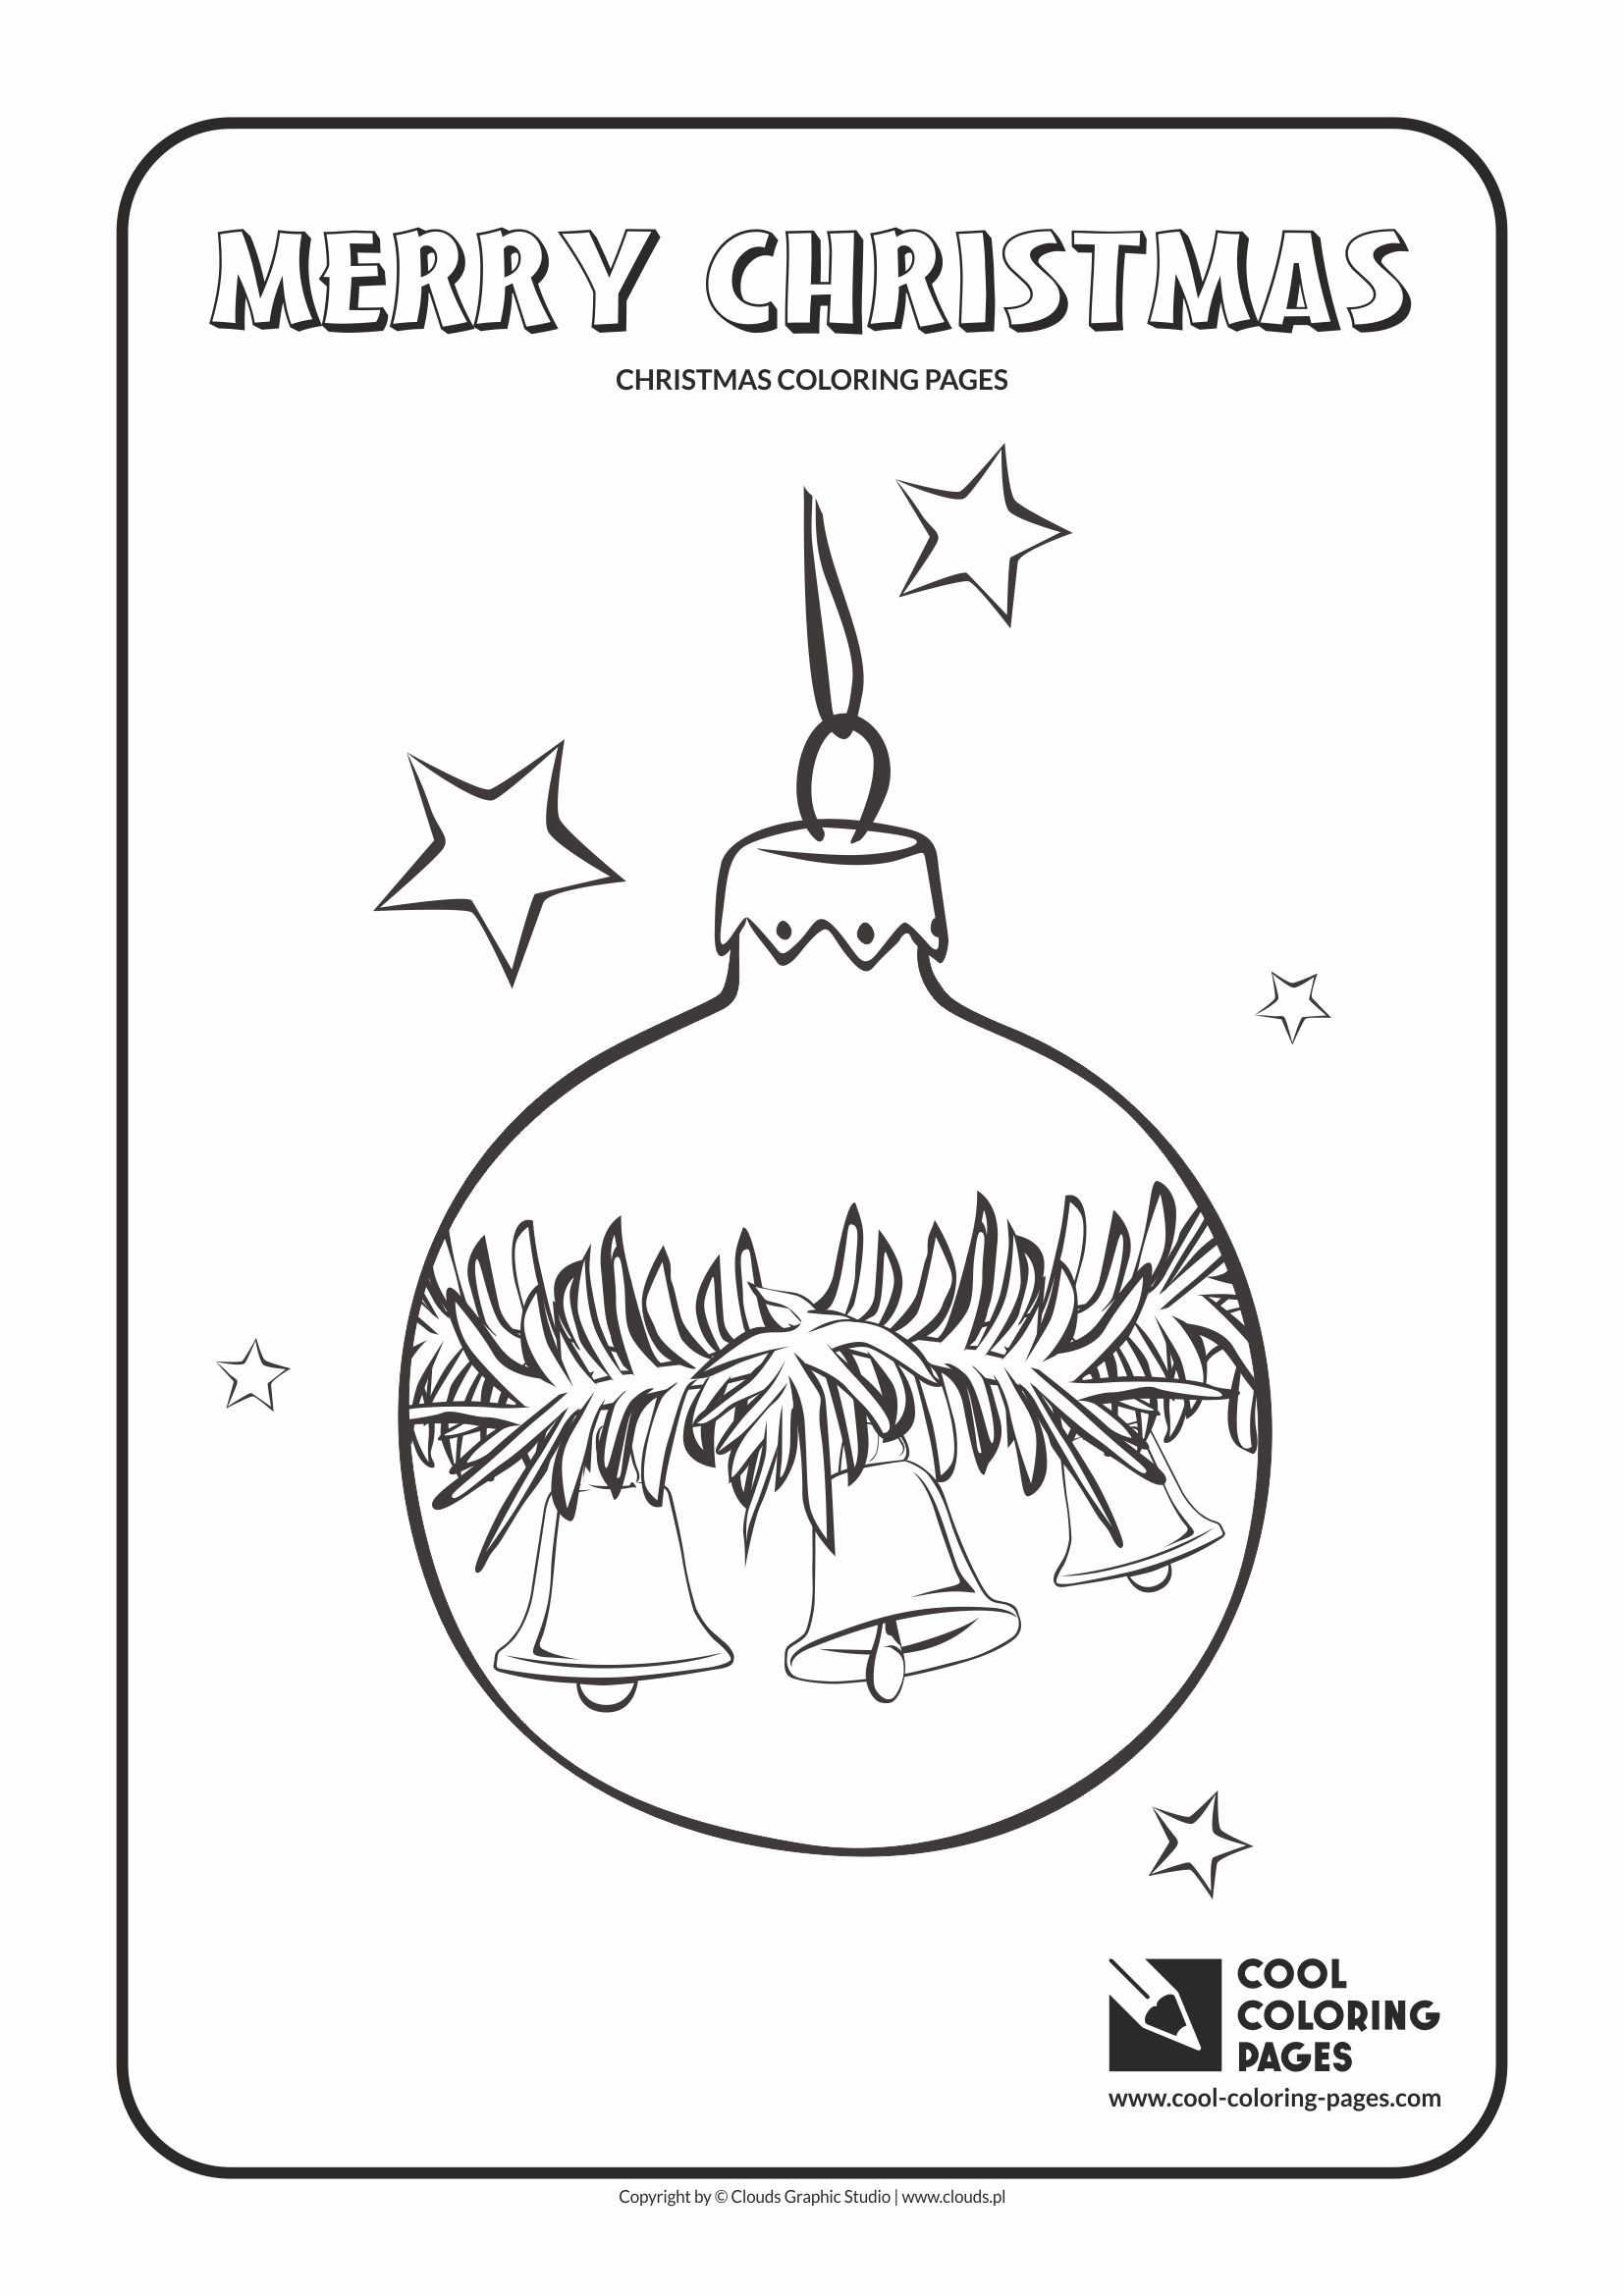 Cool Coloring Pages - Holidays / Christmas glass ball no 4 / Coloring page with Christmas glass ball no 4